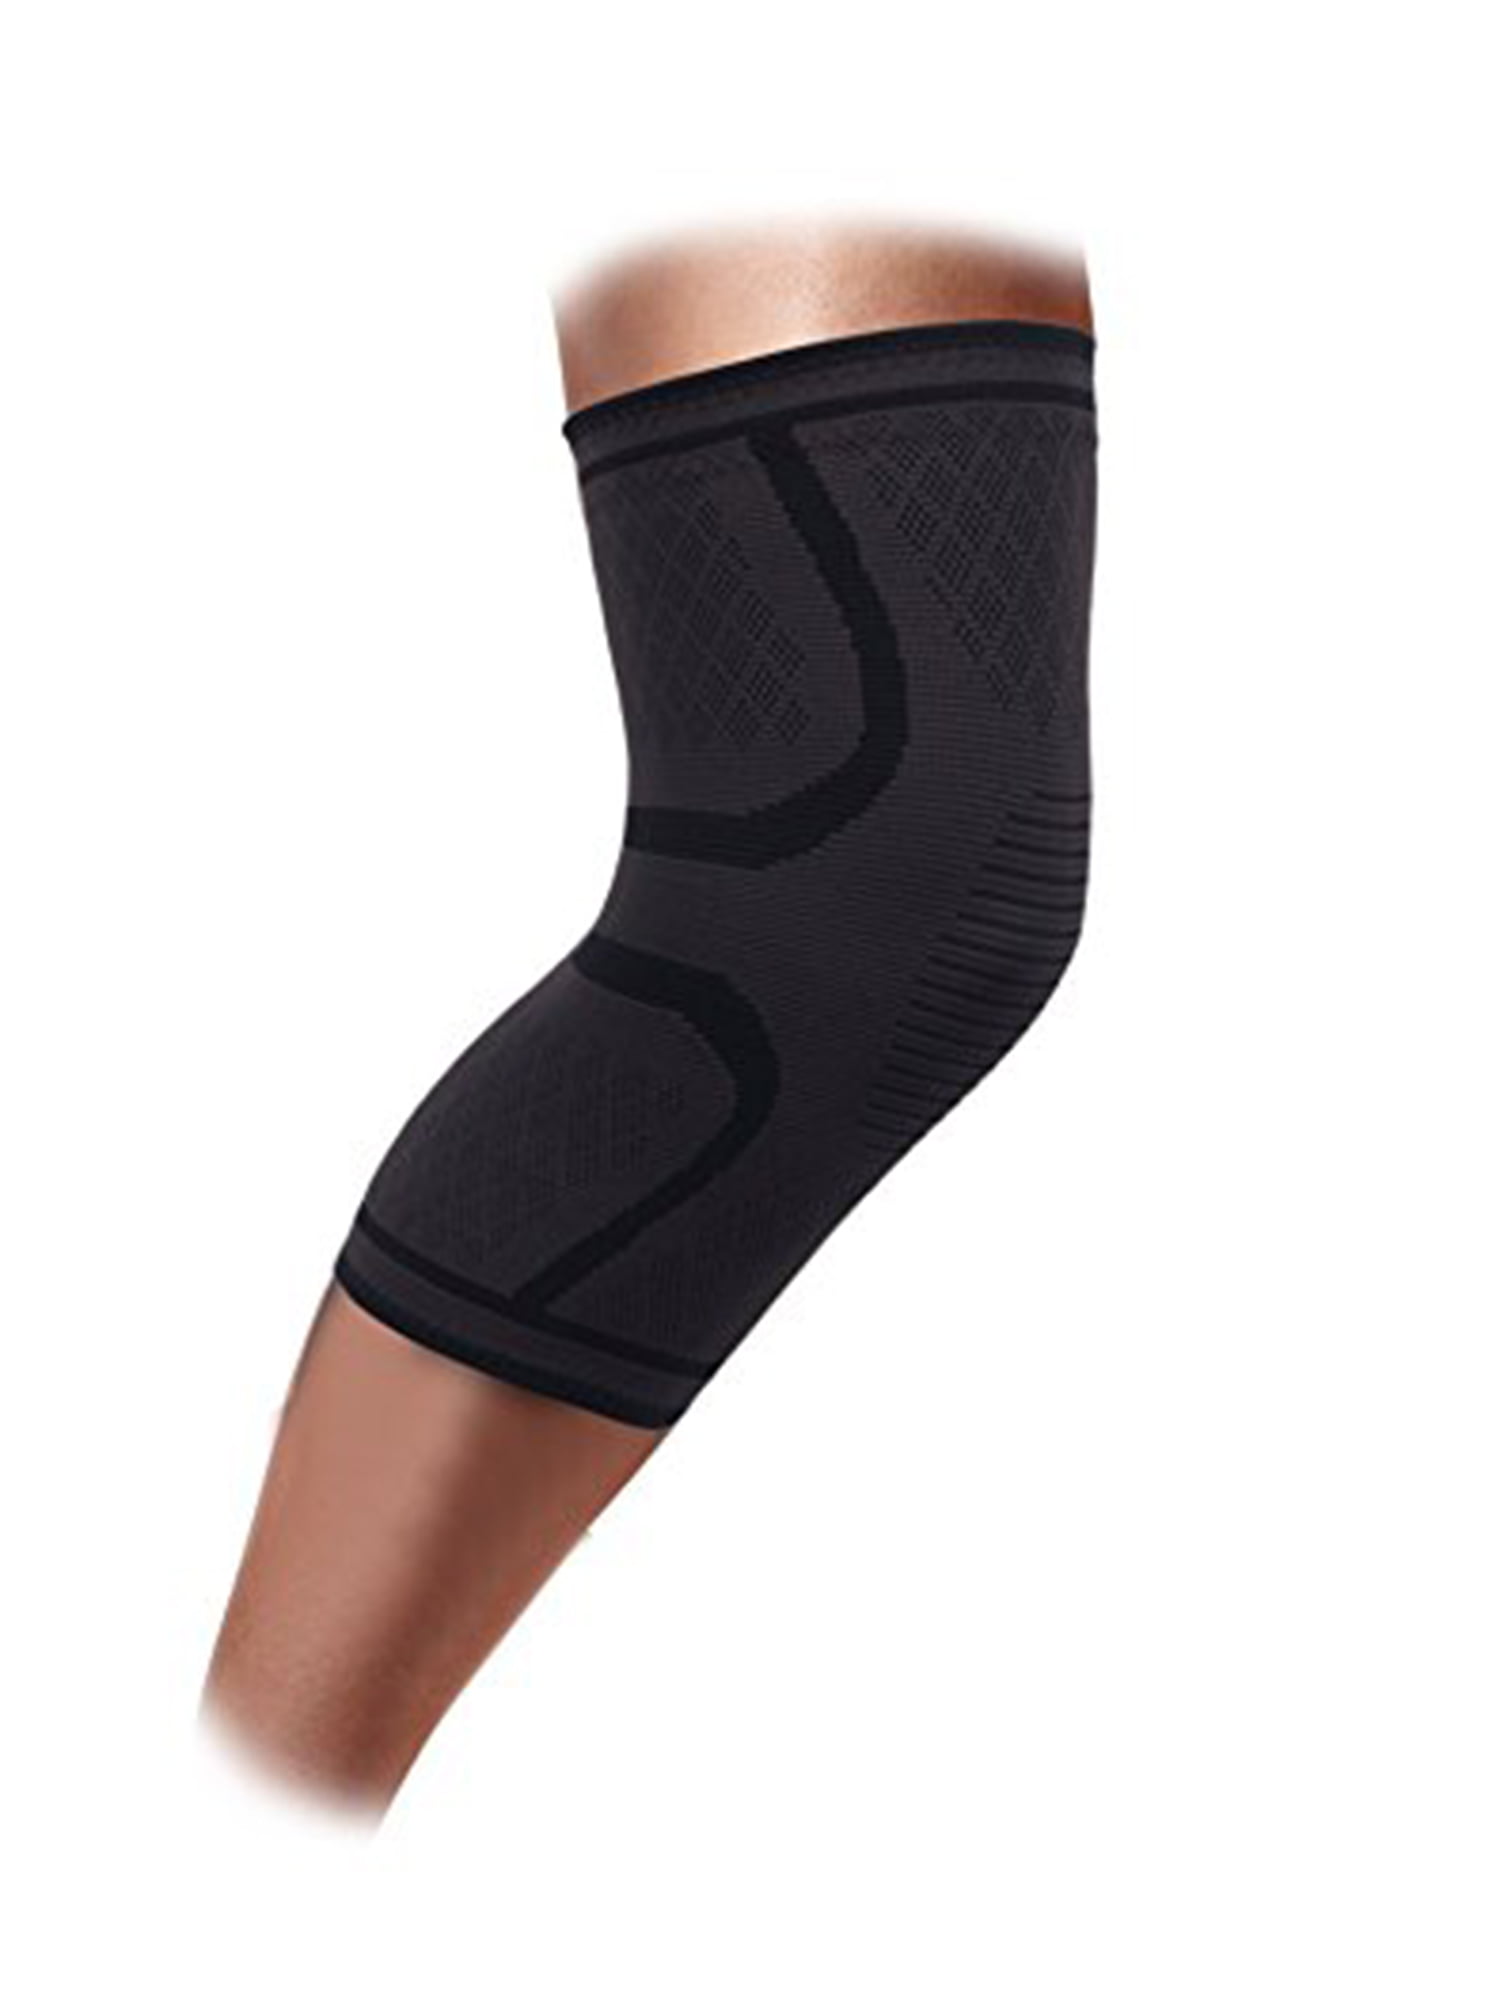 White, L Quaanti 1PCS Breathable Sports Football Basketball Knee Pads Honeycomb Knee Brace Leg Sleeve Calf Compression Knee Support Protection